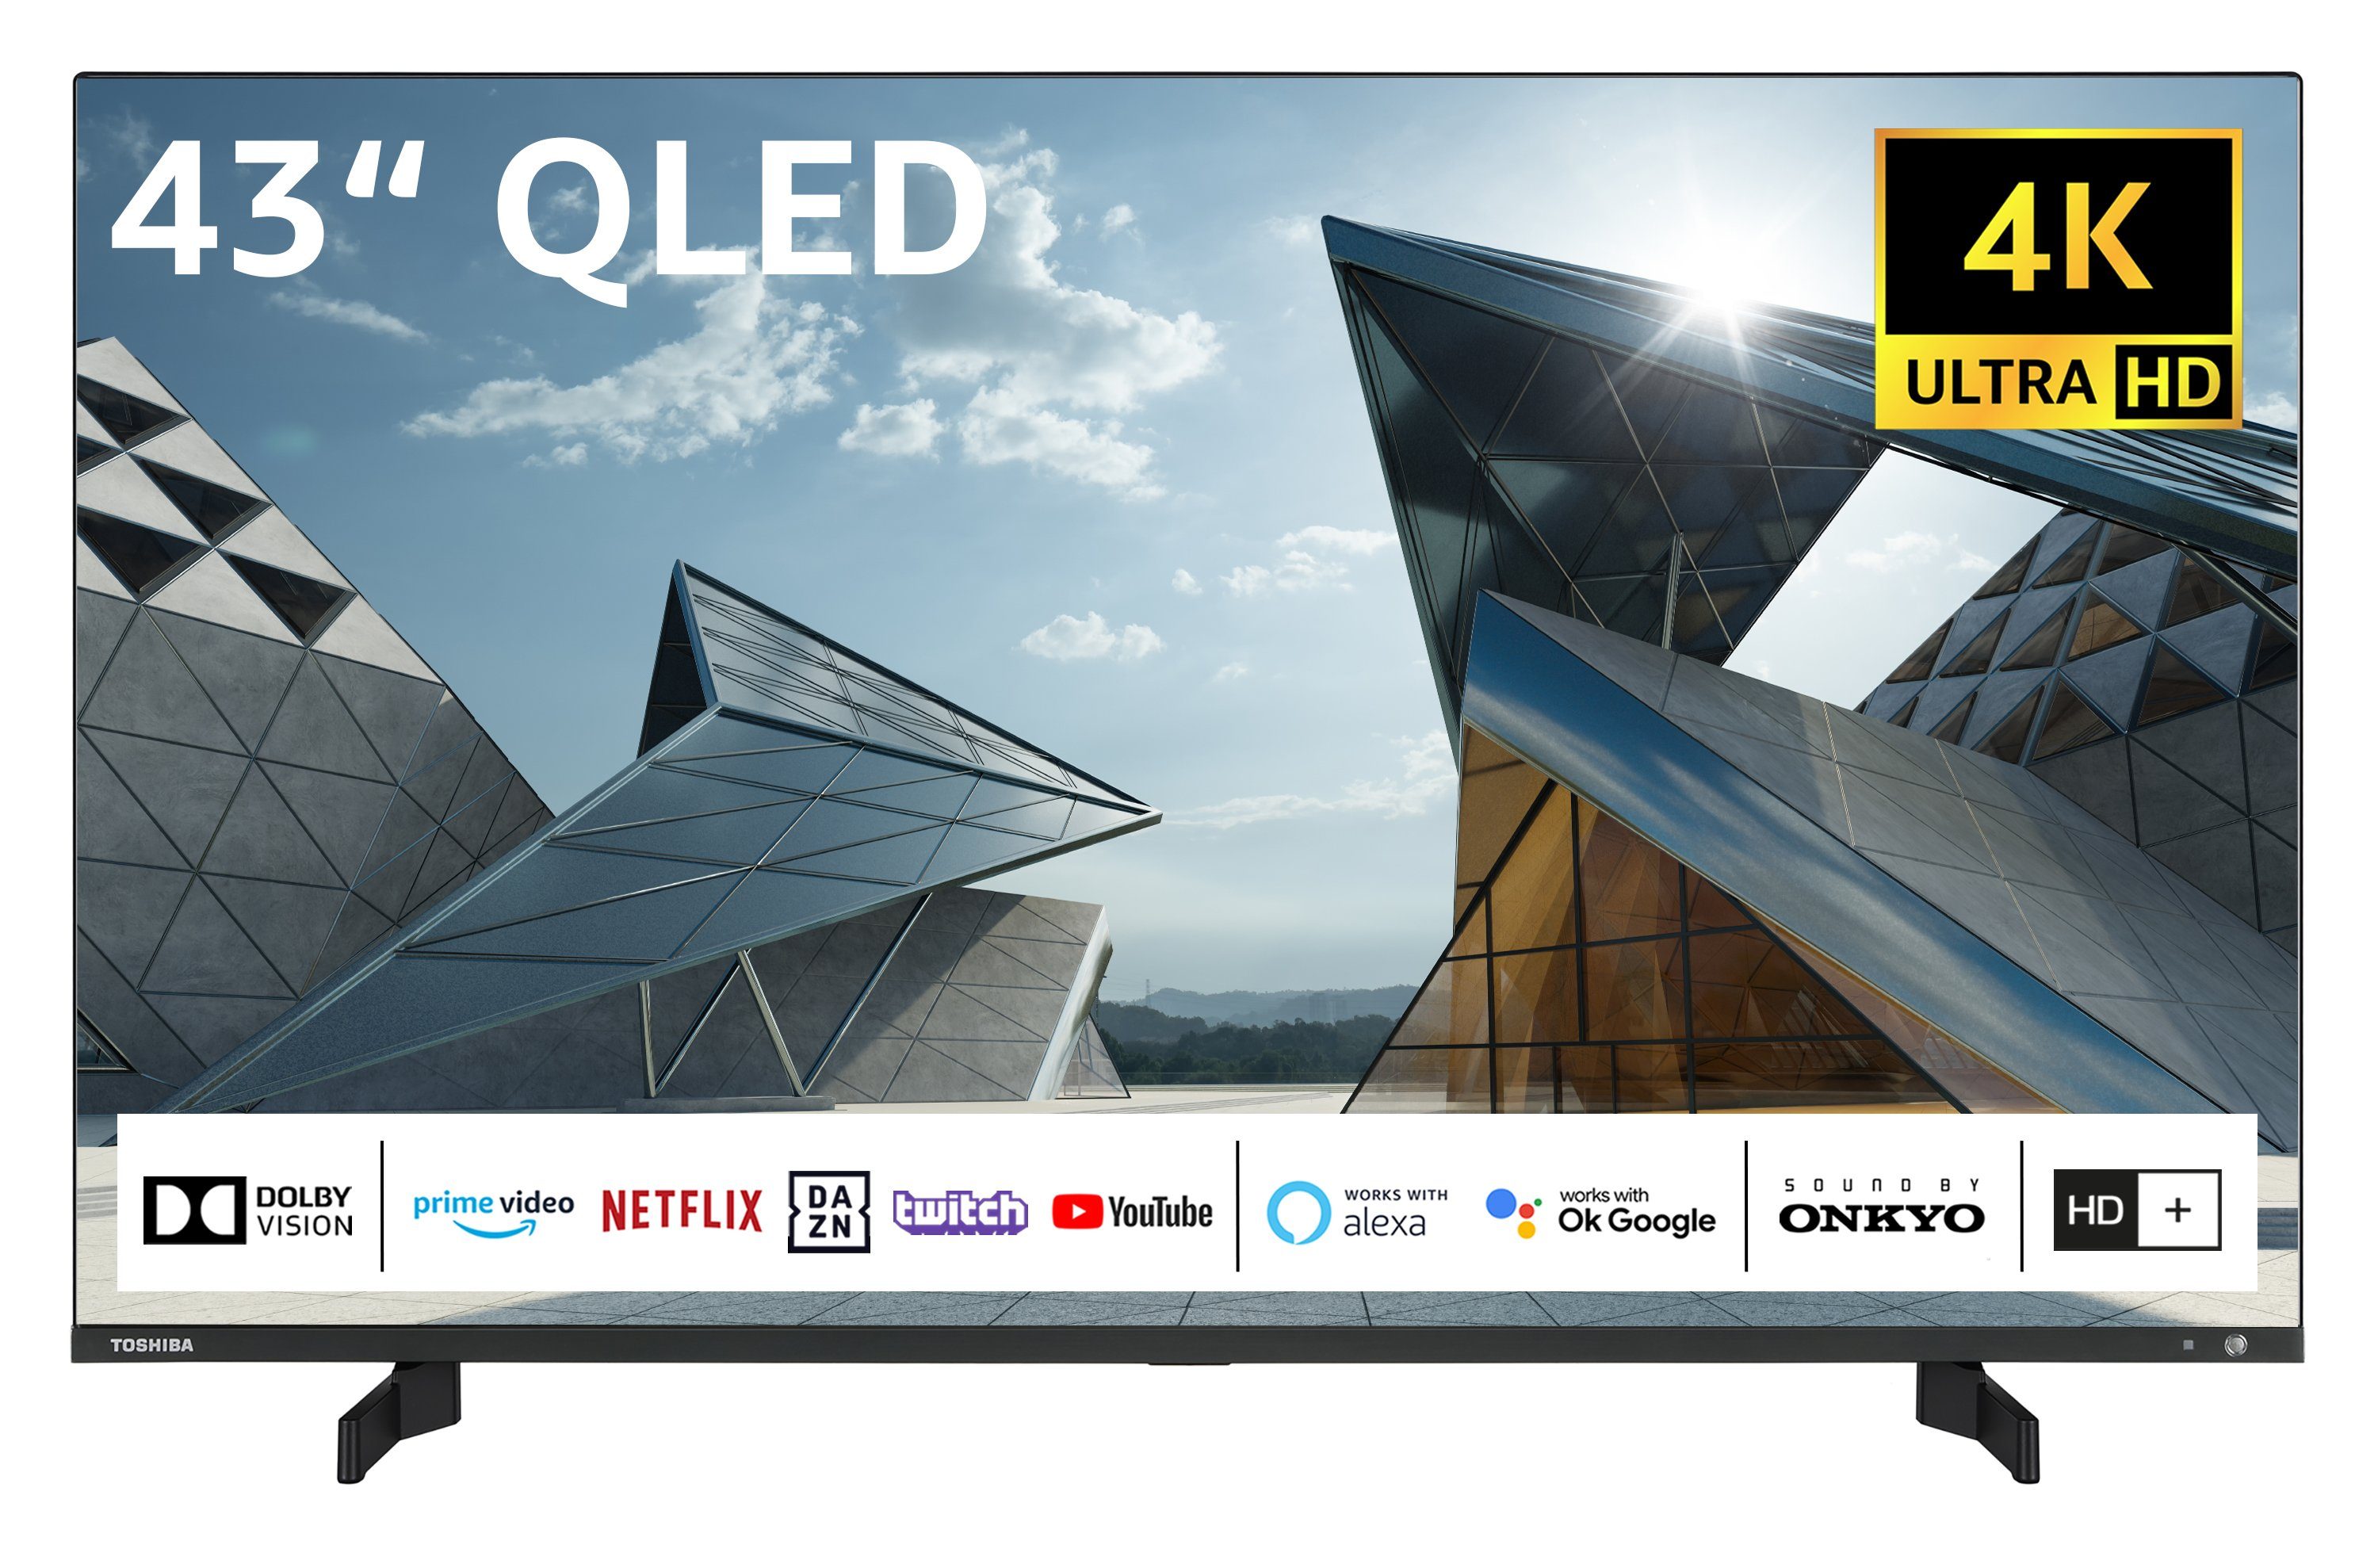 Toshiba 43QL5D63DAY QLED-Fernseher (108 cm/43 Zoll, 4K Ultra HD, Smart TV,  HDR Dolby Vision, Triple-Tuner, Sound by Onkyo - Inkl. 6 Monate HD)